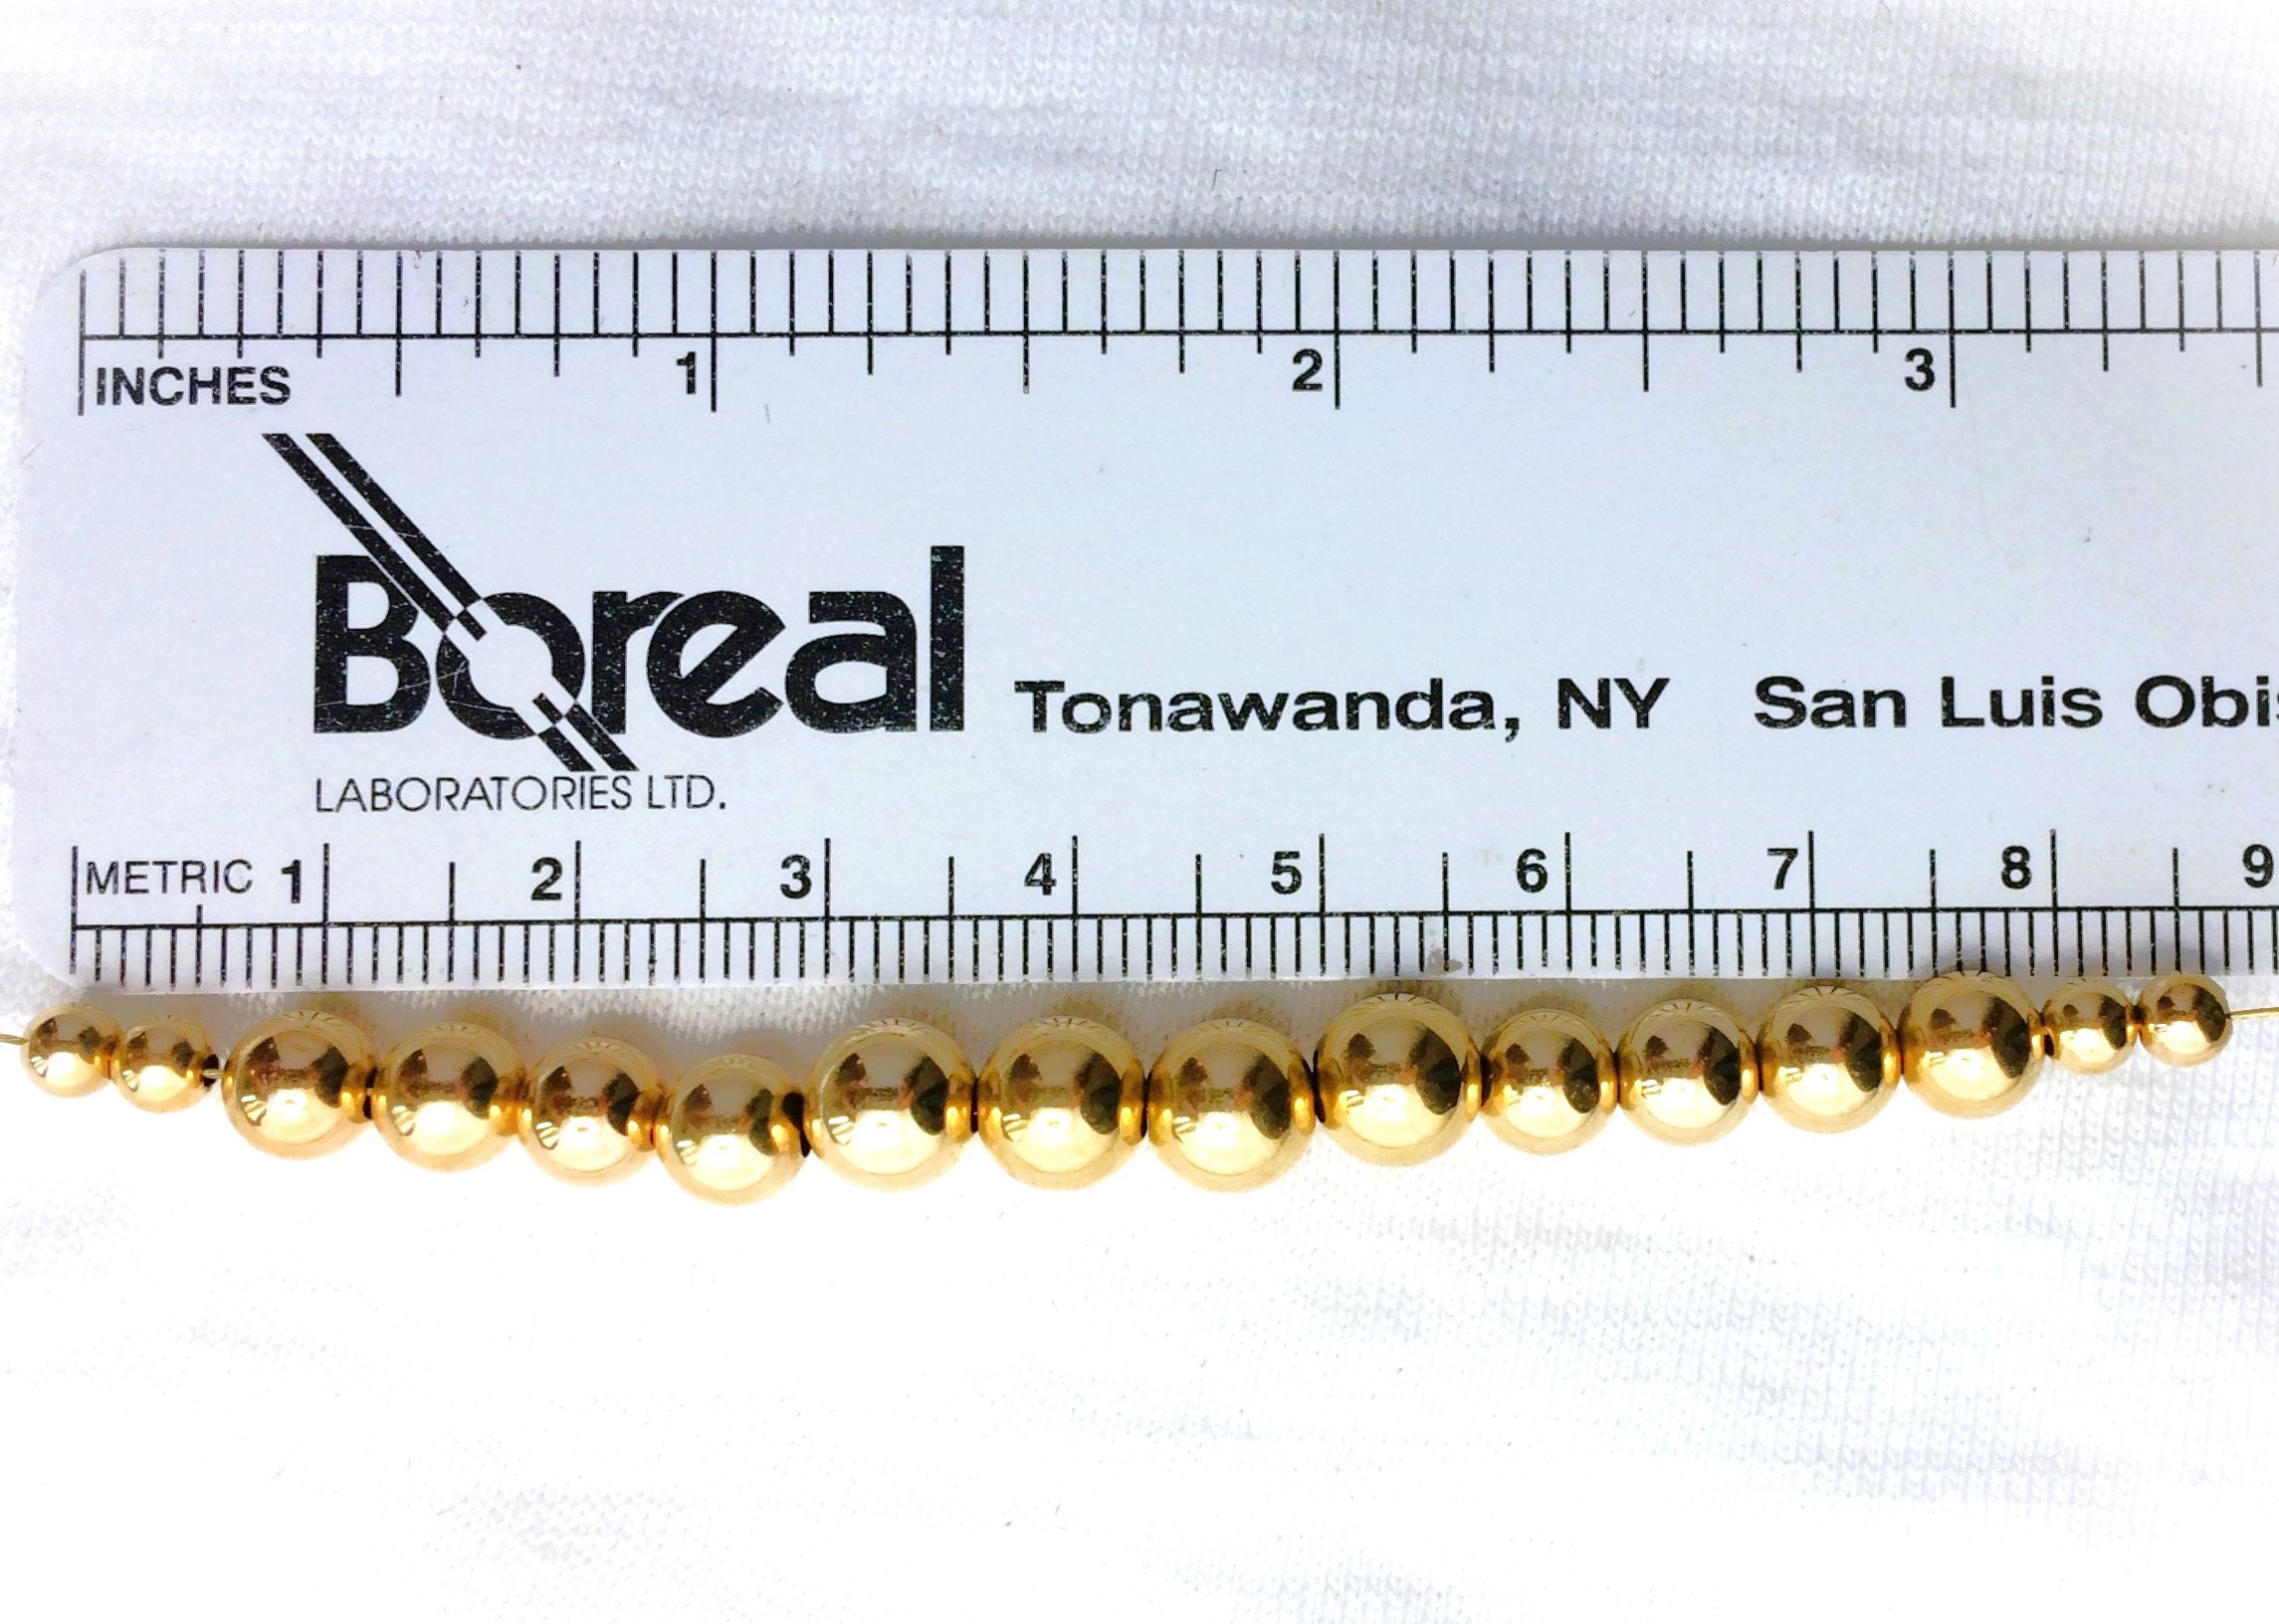 14 Kt REAL Gold Round Beads 2mm, 2.5mm, 3mm, 4mm, 5mm, 6mm, 7, 8, 10mm, 14K  Gold Beads for Jewelry, NOT Gold-Filled, Choose Size & qty